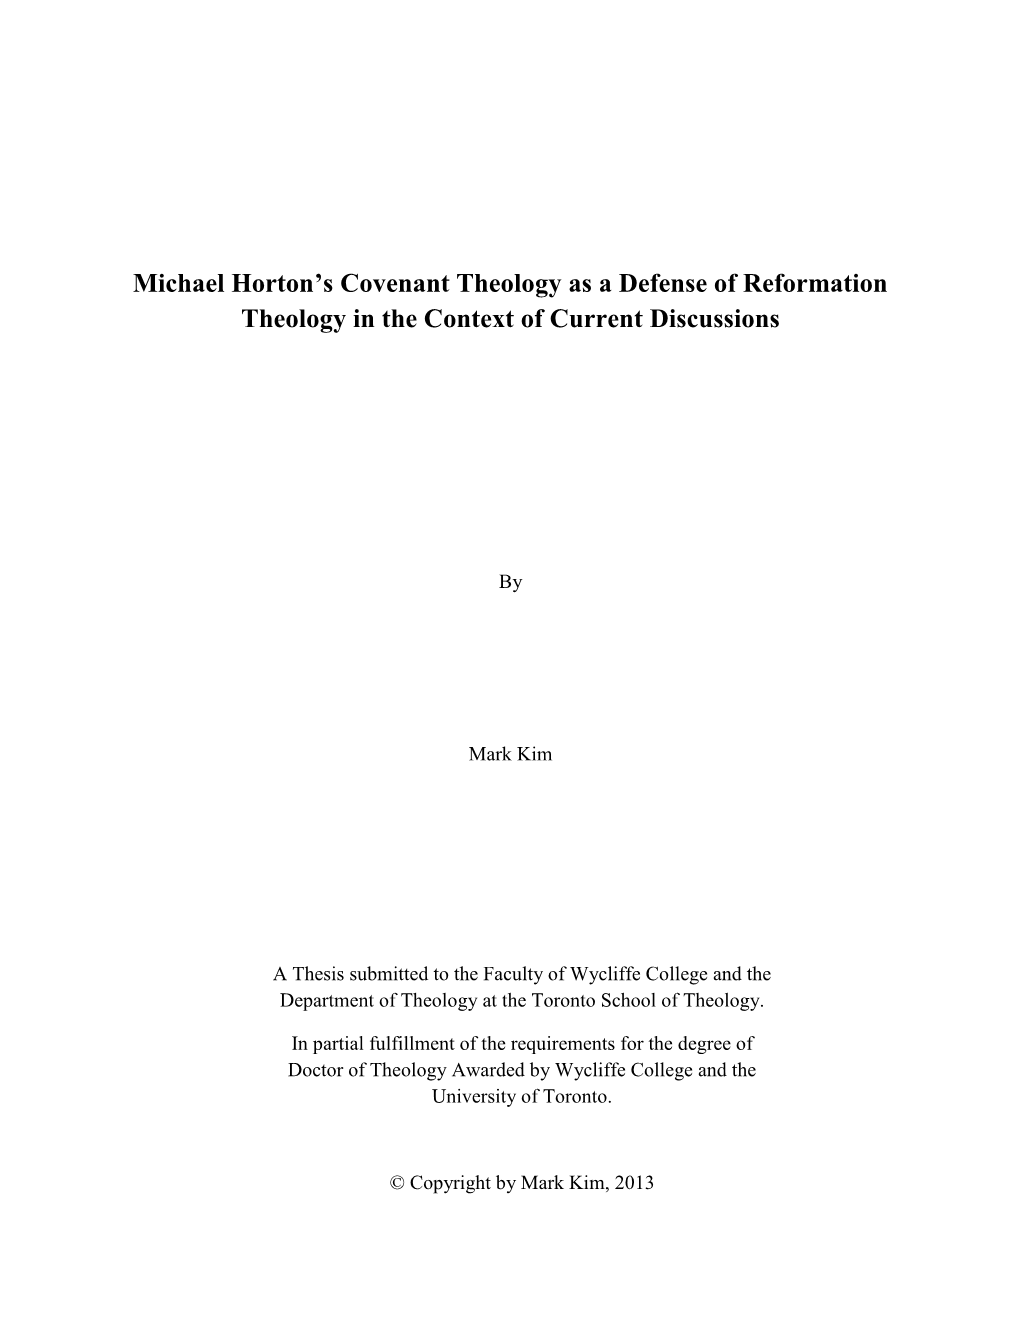 Michael Horton's Covenant Theology As a Defense of Reformation